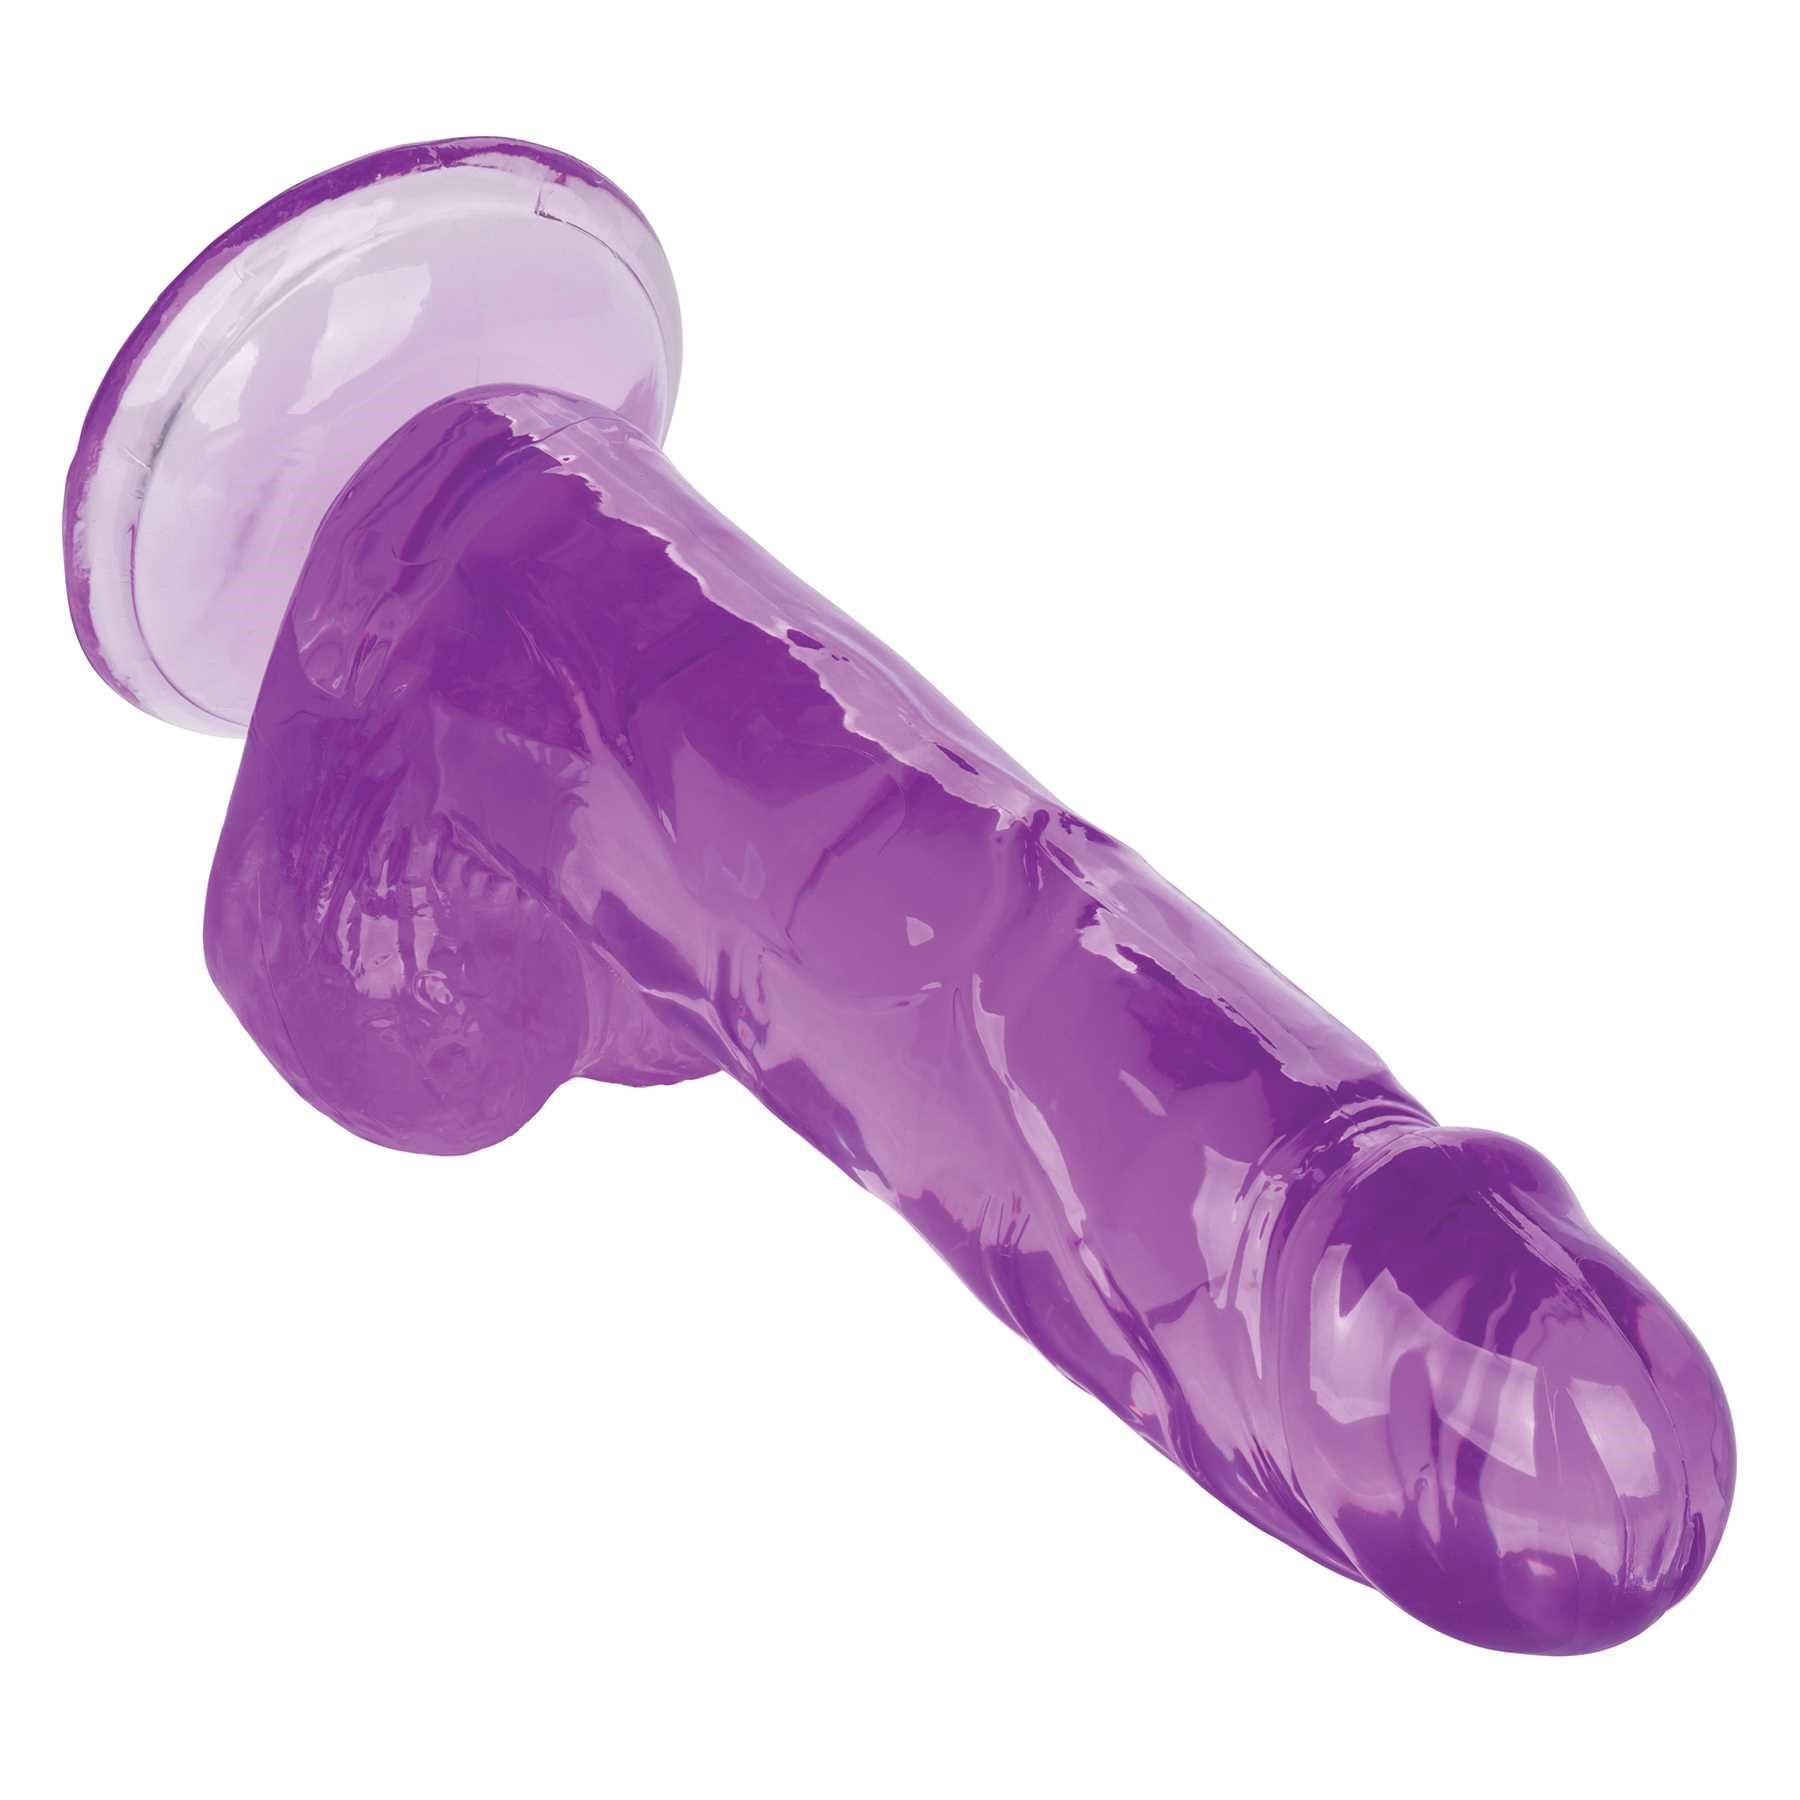 Size Queen 6 Inch Dildo Tip Pointing Downward - Purple